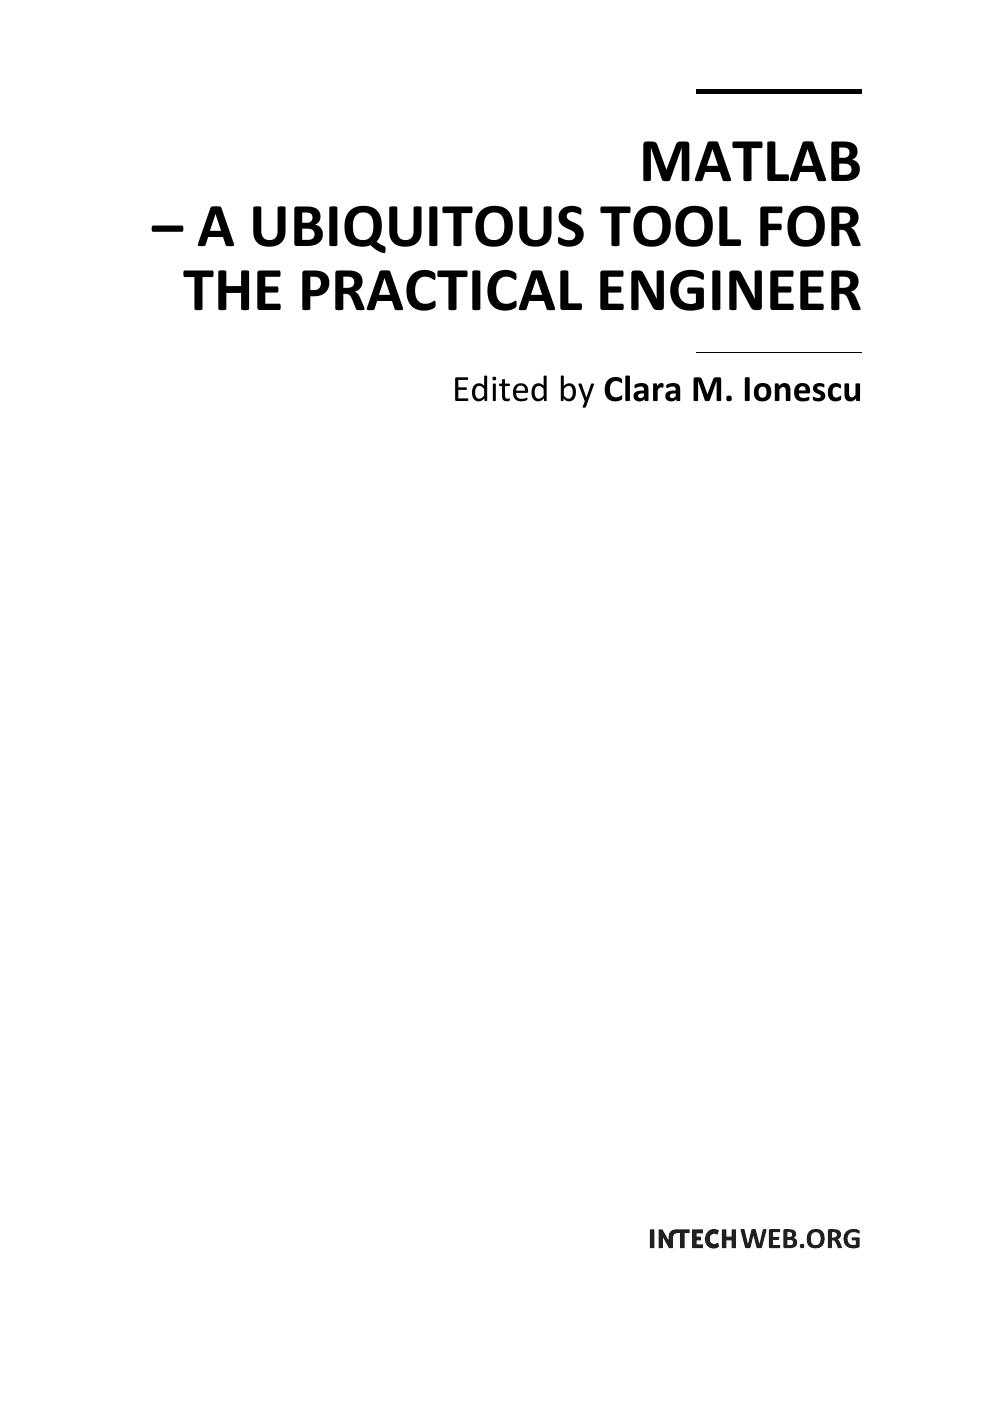 Microsoft Word - preface_MATLAB - A Ubiquitous Tool for the Practical Engineer